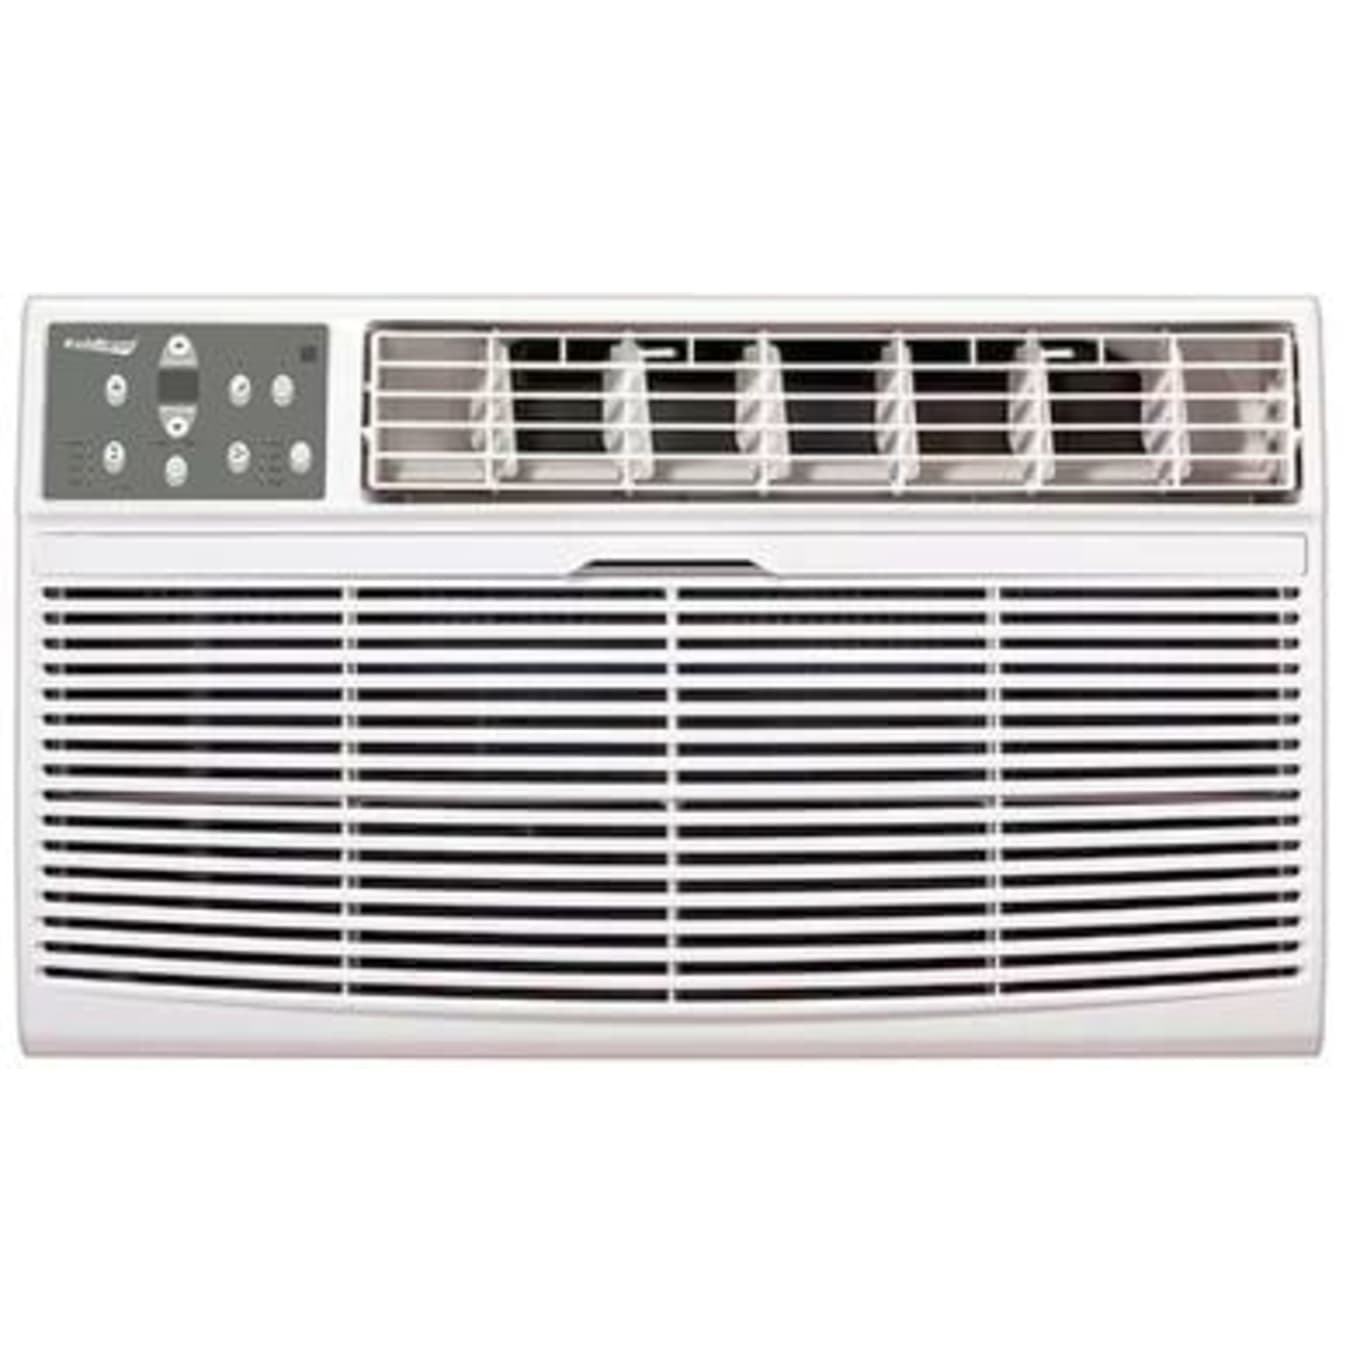 Koldfront, Ccy 8000 BTU 10.6 EER (Energy Efficiency Ratio) Thru The Wall / Through The Wall Air Conditioner